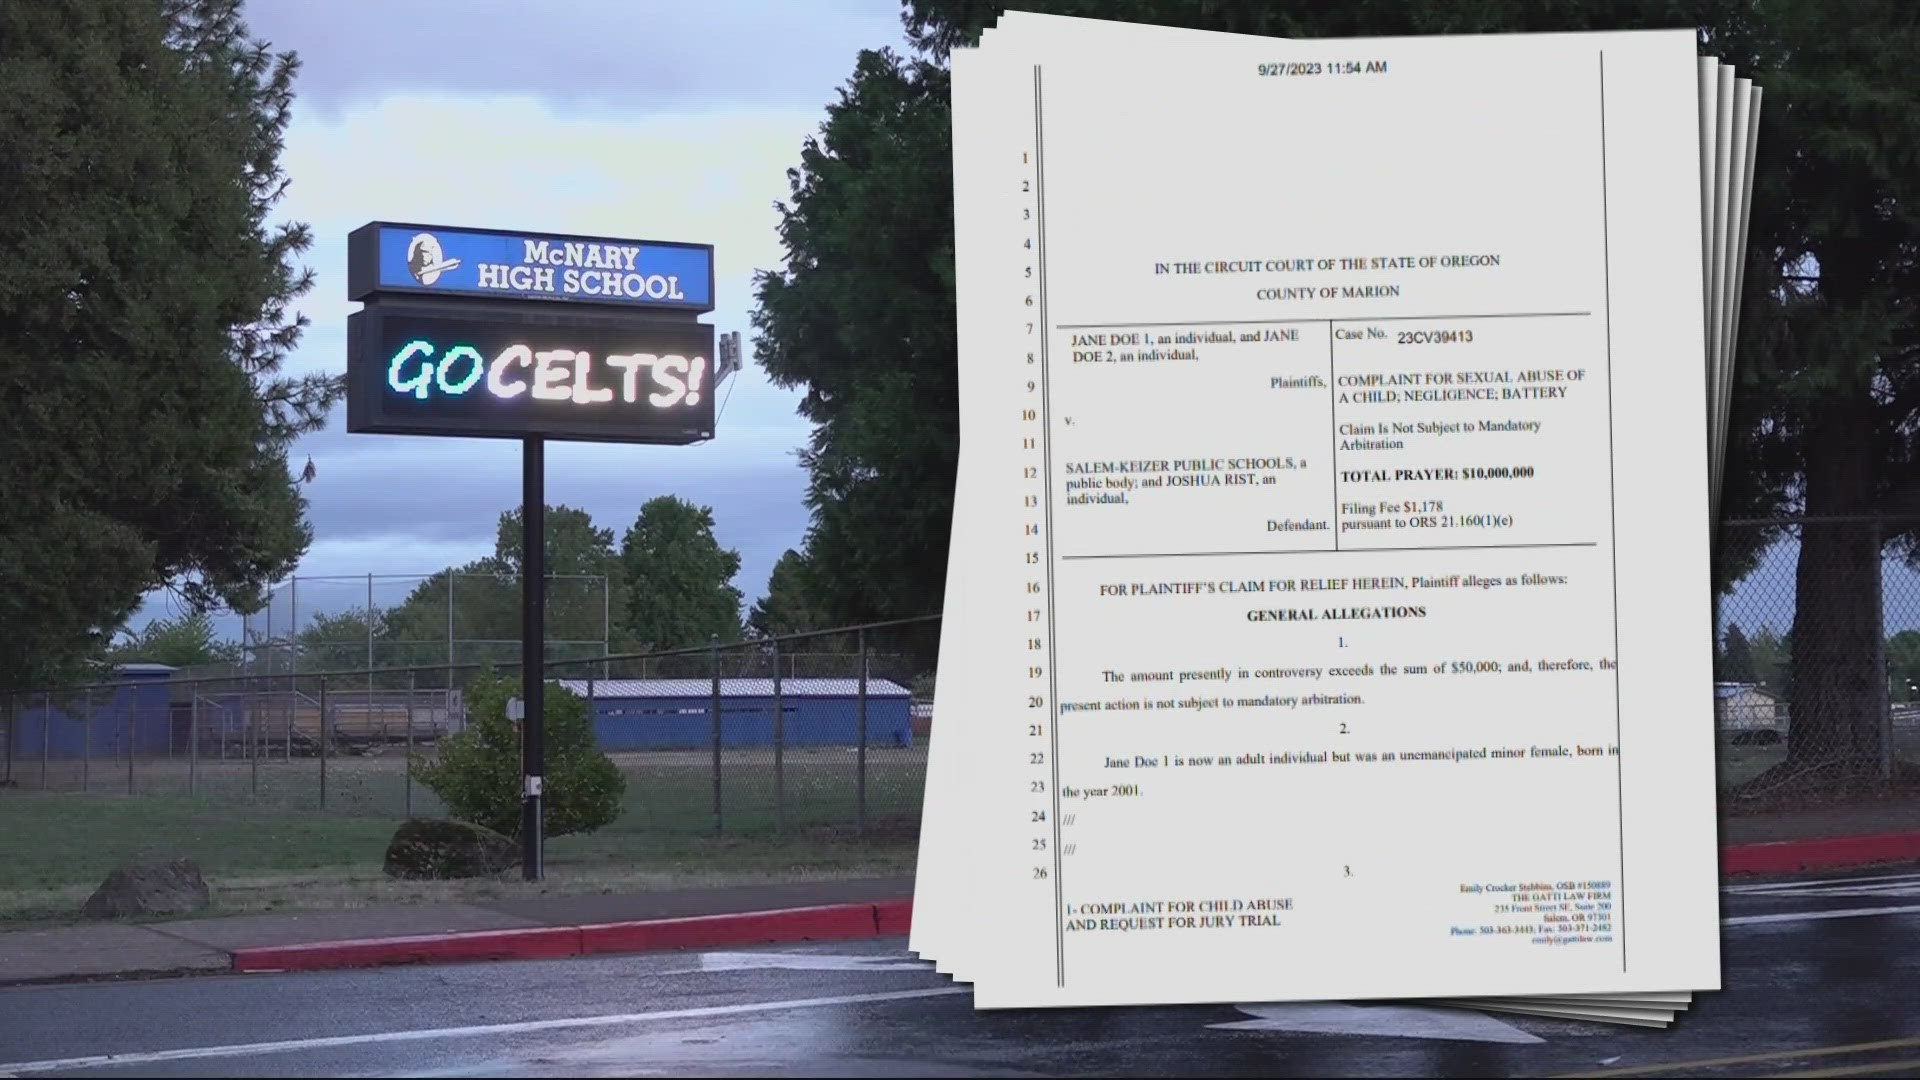 The lawsuit alleges that between 2015 and 2020, a former McNary High School choir teacher formed an inappropriate relationship with the two students.